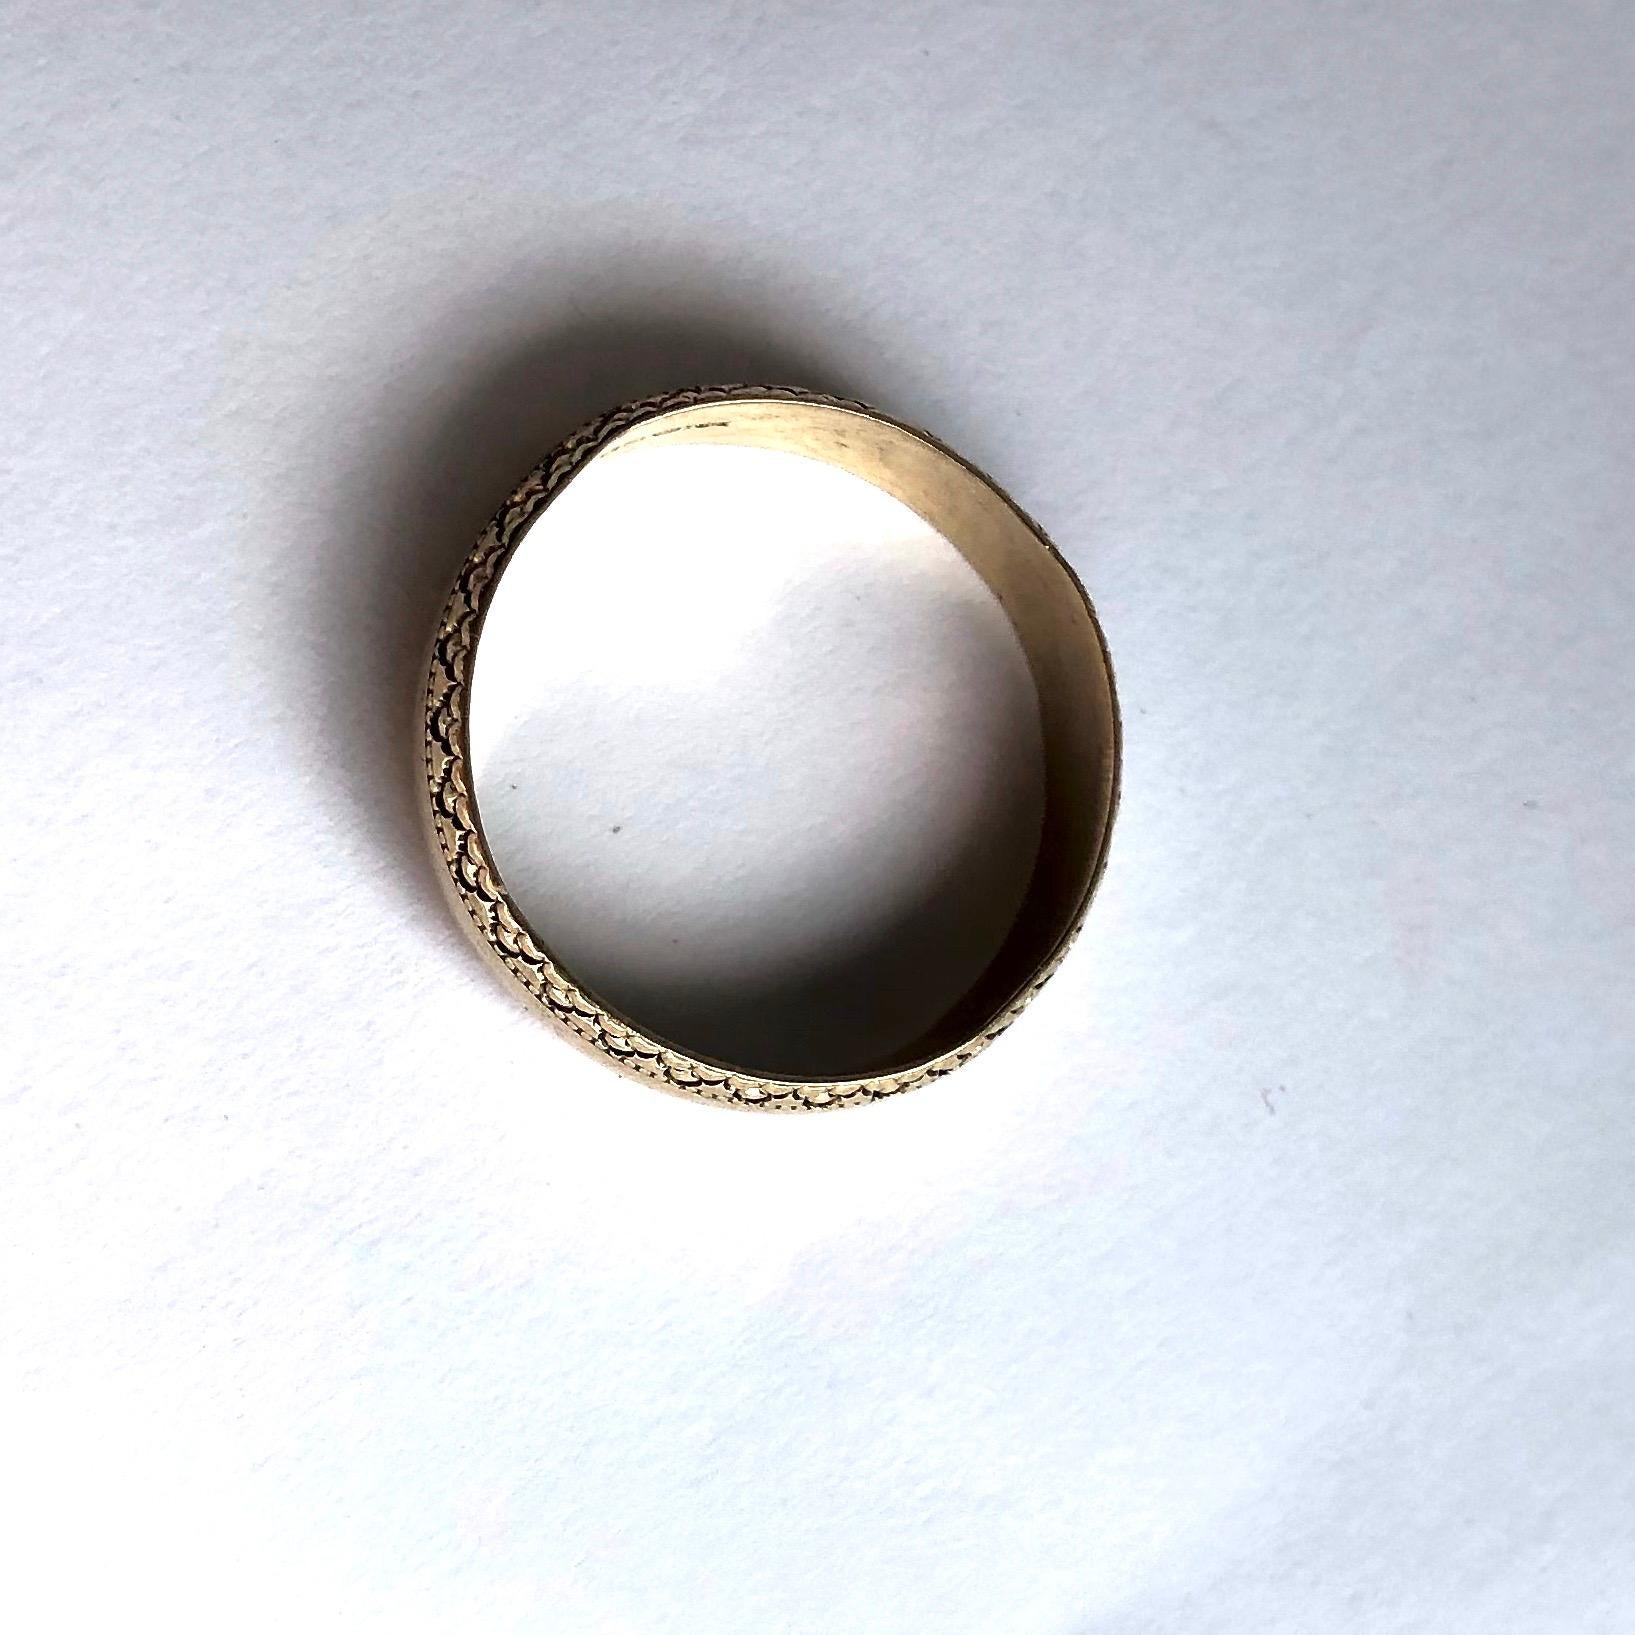 The 9ct gold band is engraved with a fancy design on both of the outer edges of the band. 

Ring Size: P or 7 1/2 
Band Width: 5mm

Weight: 2.44g